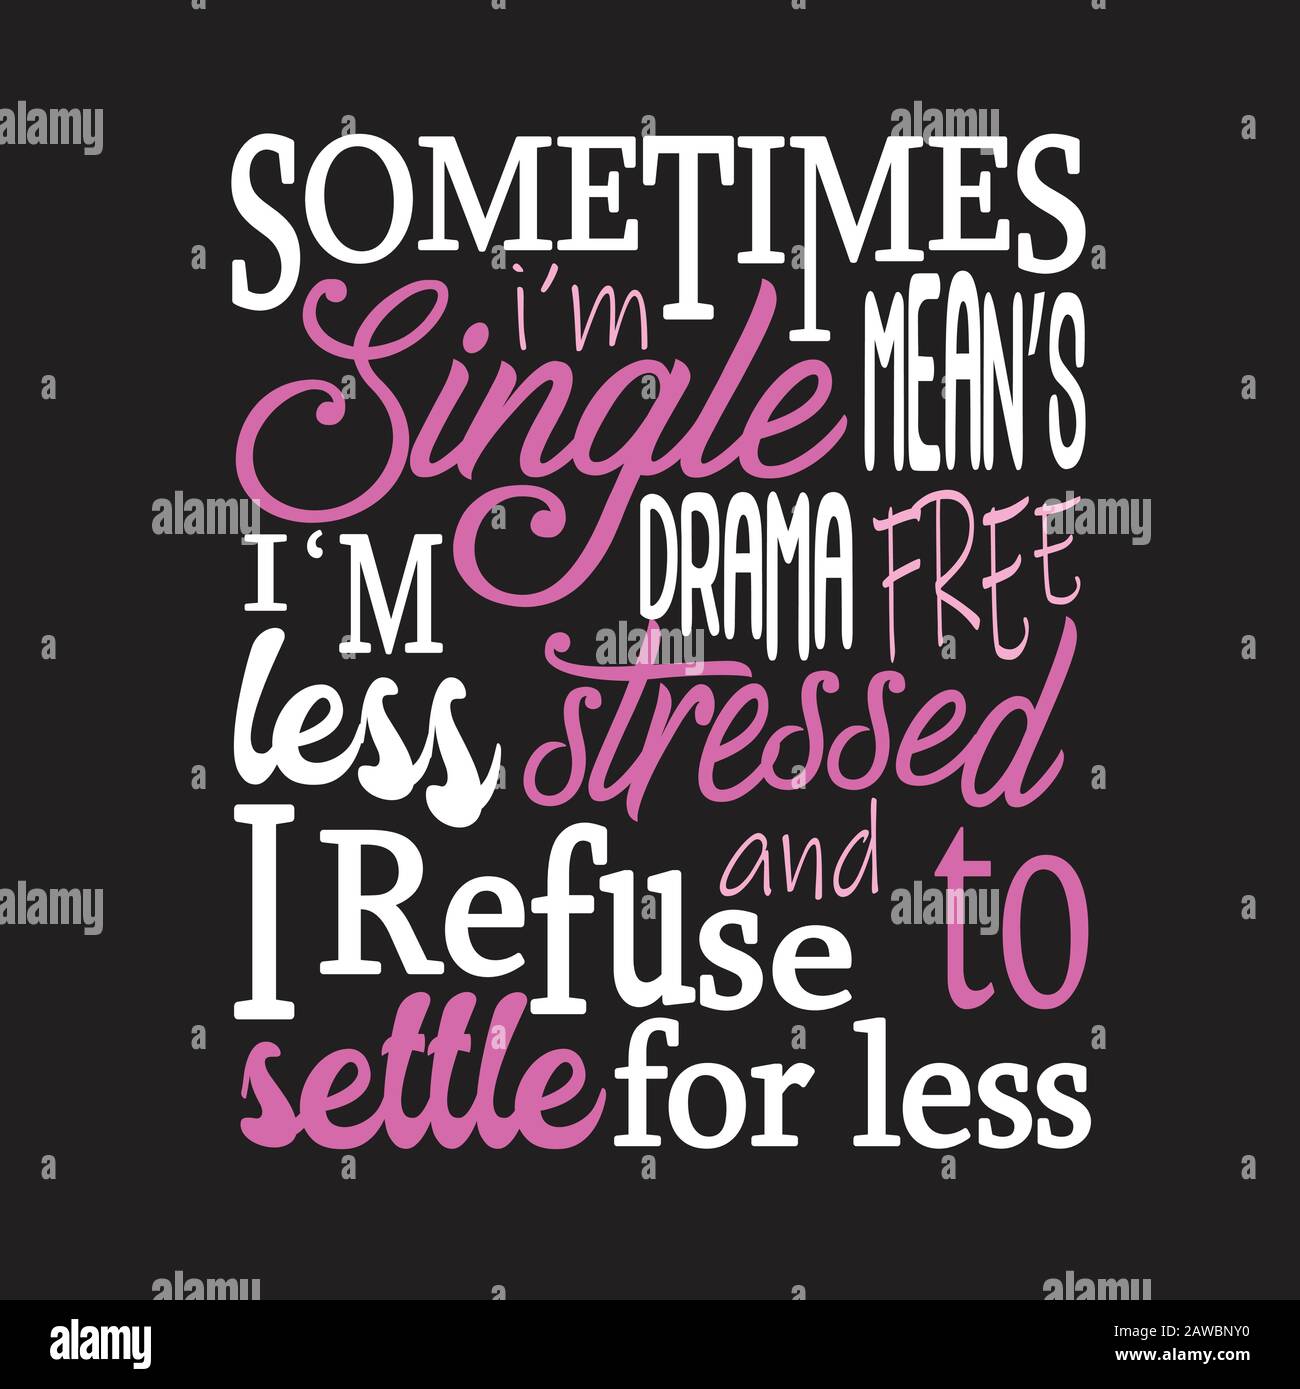 https://c8.alamy.com/comp/2AWBNY0/single-quotes-and-slogan-good-for-print-sometimes-i-m-single-means-i-m-drama-free-less-stressed-and-i-refuse-to-settle-for-less-2AWBNY0.jpg